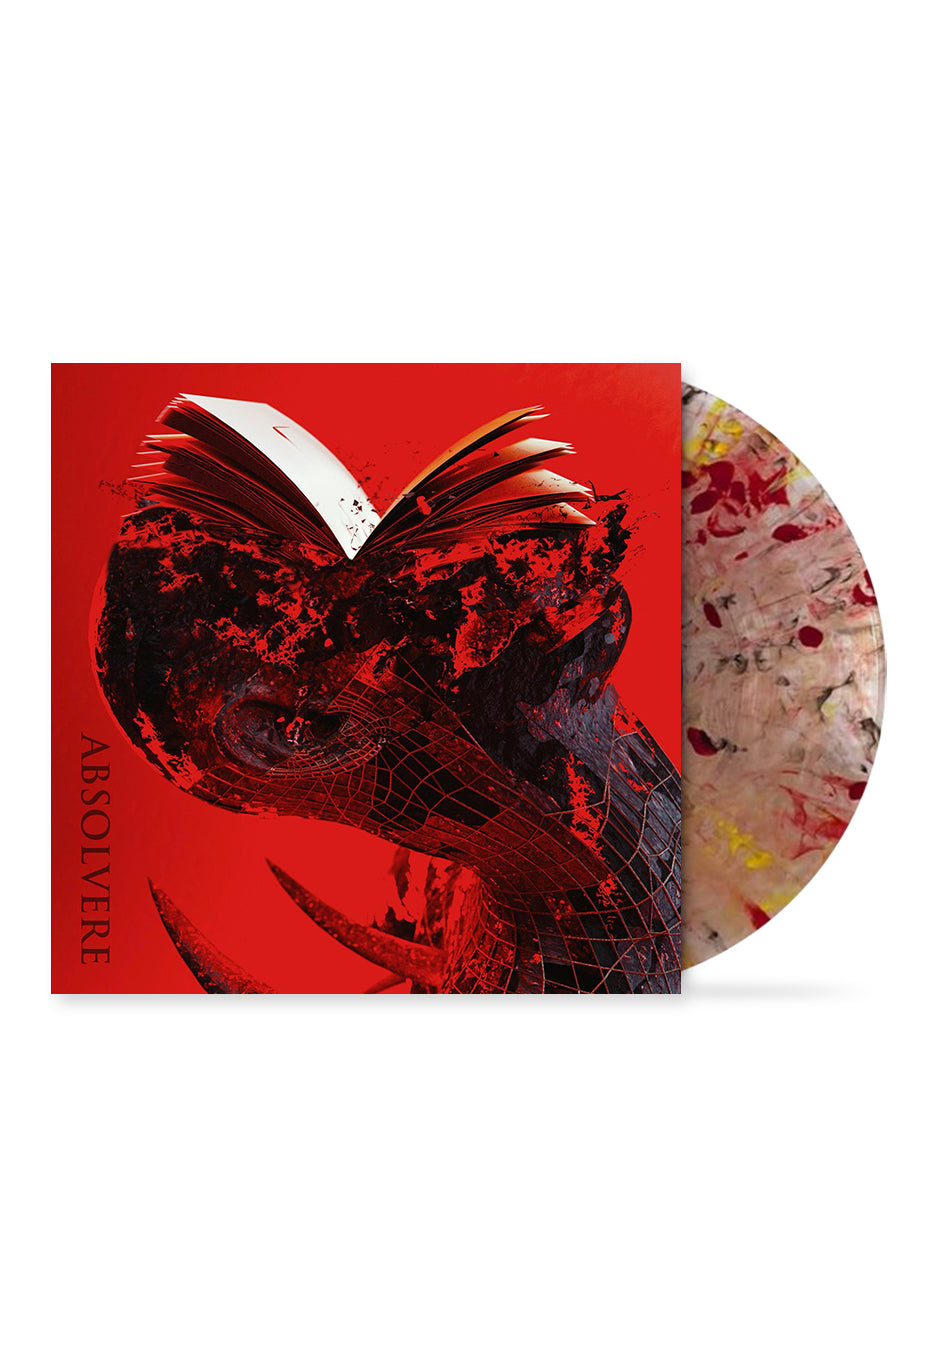 Signs Of The Swarm - Absolvere (Crimson Edition) Bloody Rust - Colored Vinyl